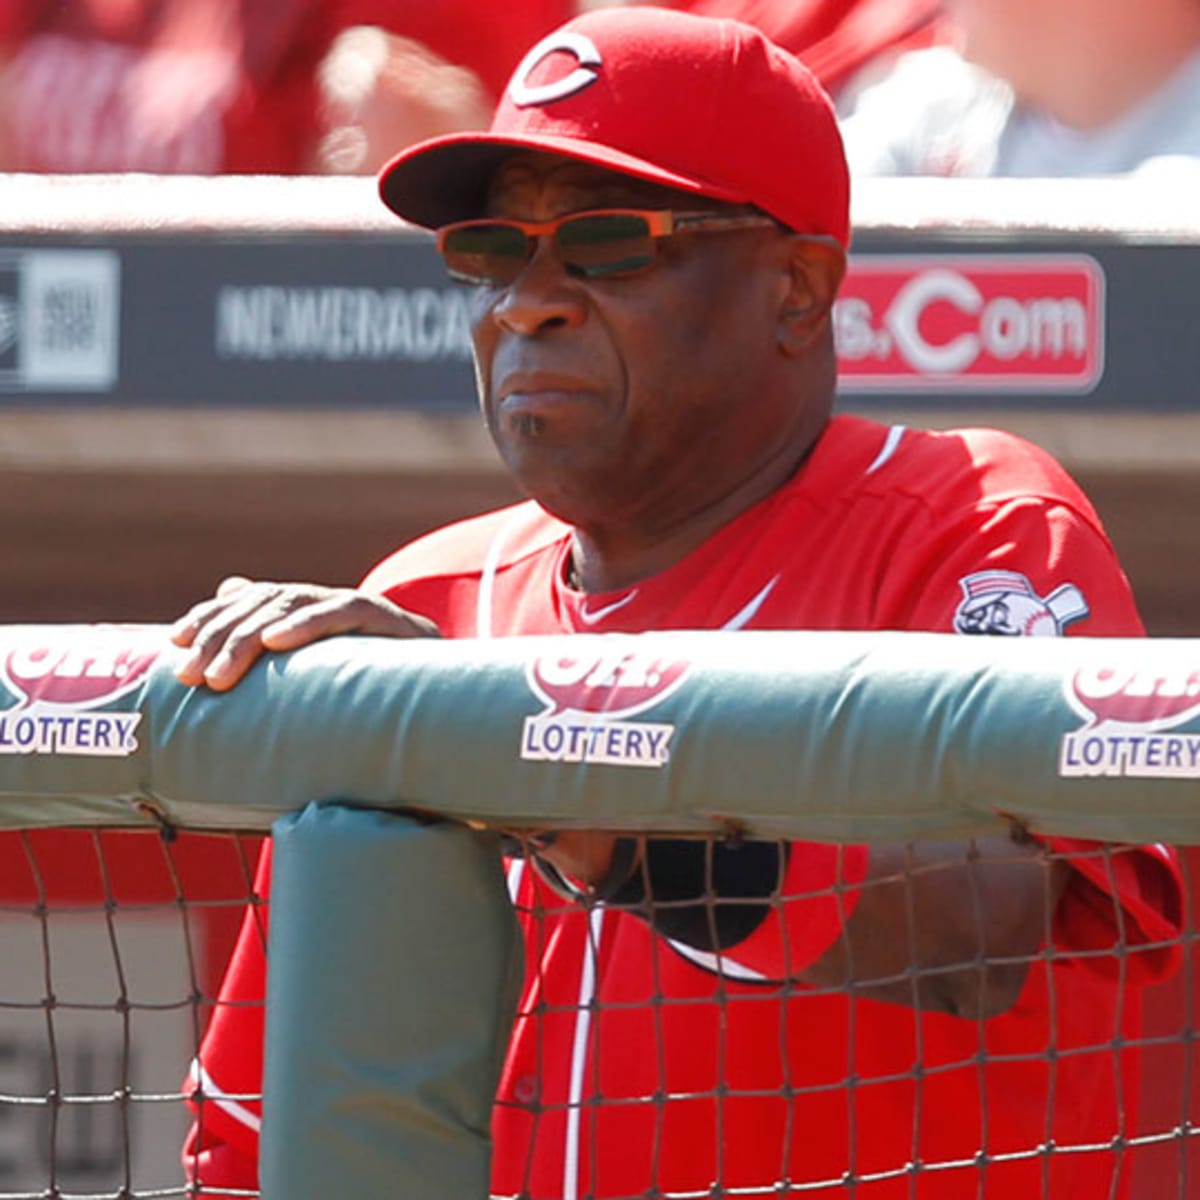 Division titles not enough as Nationals fire Dusty Baker